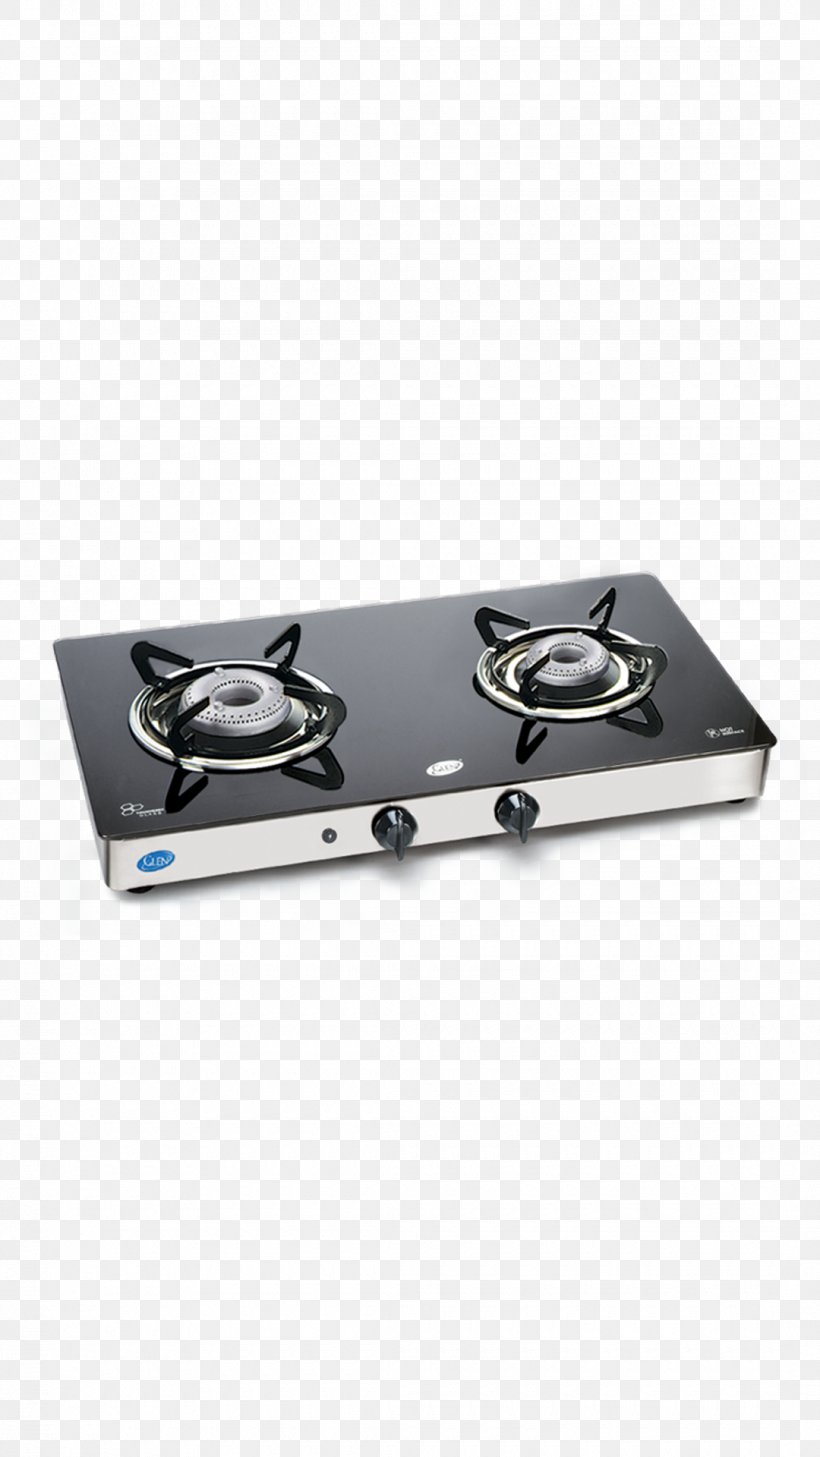 Gas Stove Cooking Ranges Glass Gas Burner, PNG, 1080x1920px, Gas Stove, Brenner, Chimney, Cooking Ranges, Cooktop Download Free